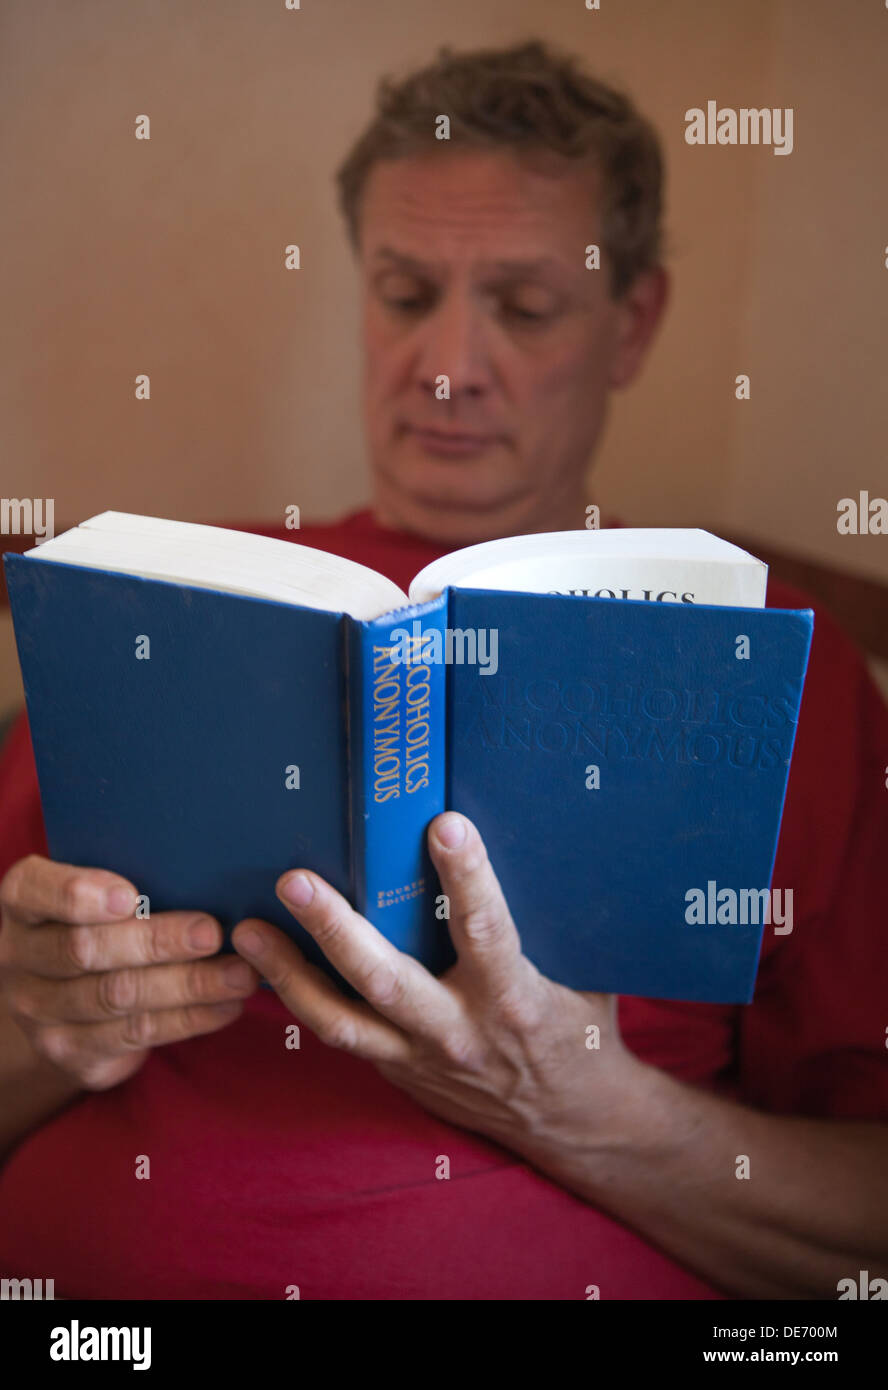 Middle aged man reading Alcoholics Anonymous text, also called the Big Book in recovery groups. Stock Photo